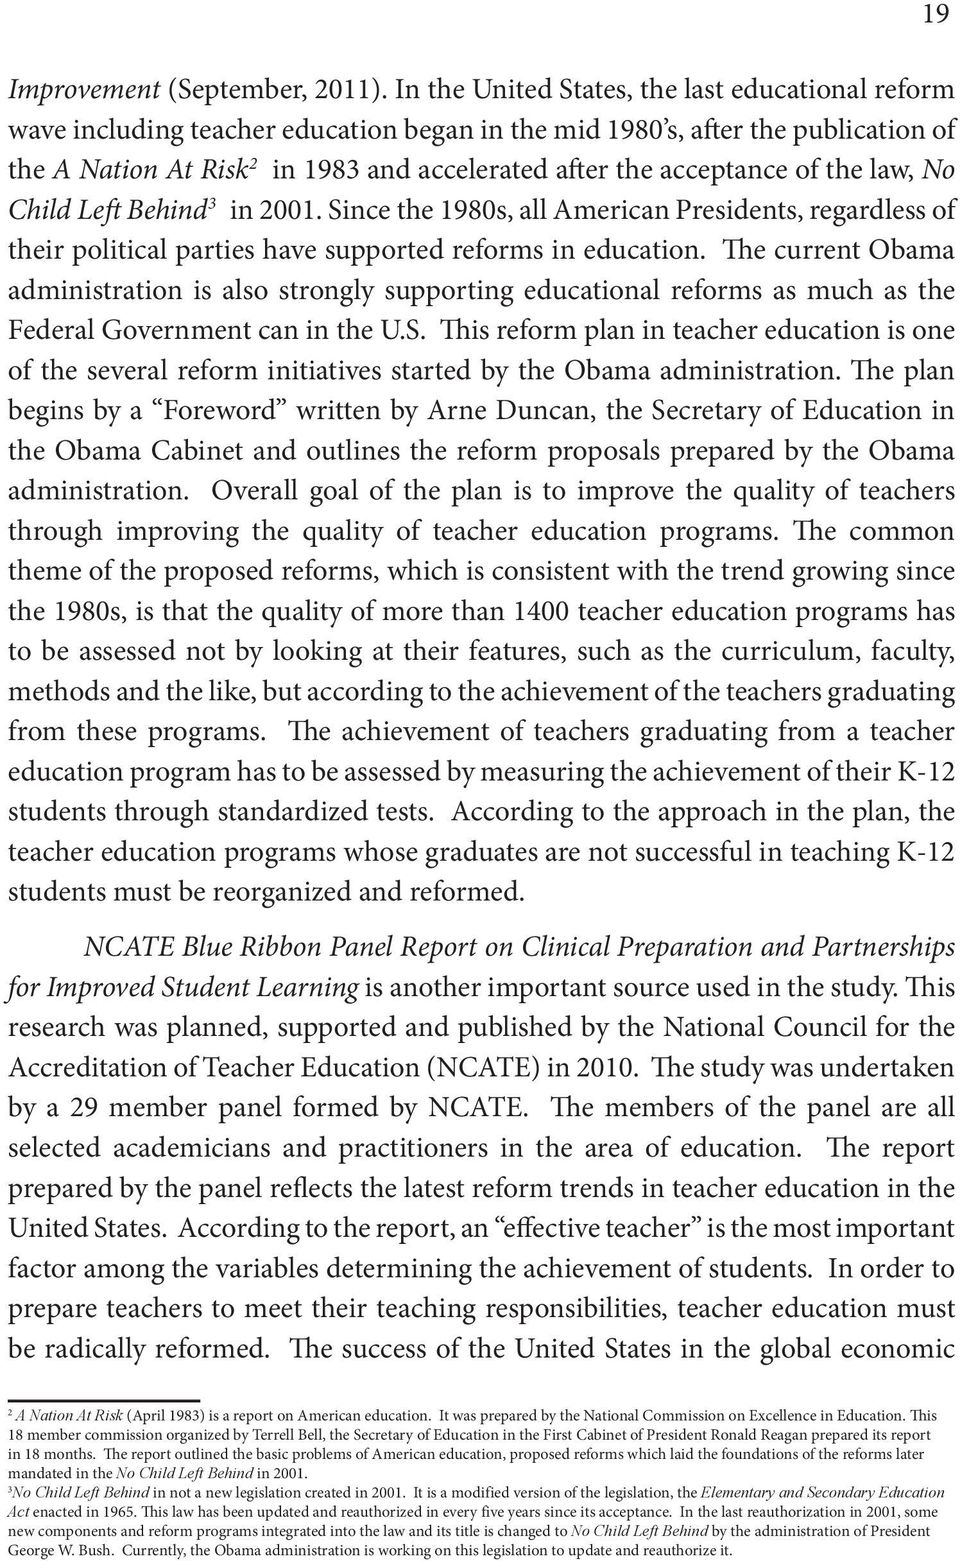 acceptance of the law, No Child Left Behind 39 in 2001. Since the 1980s, all American Presidents, regardless of their political parties have supported reforms in education.